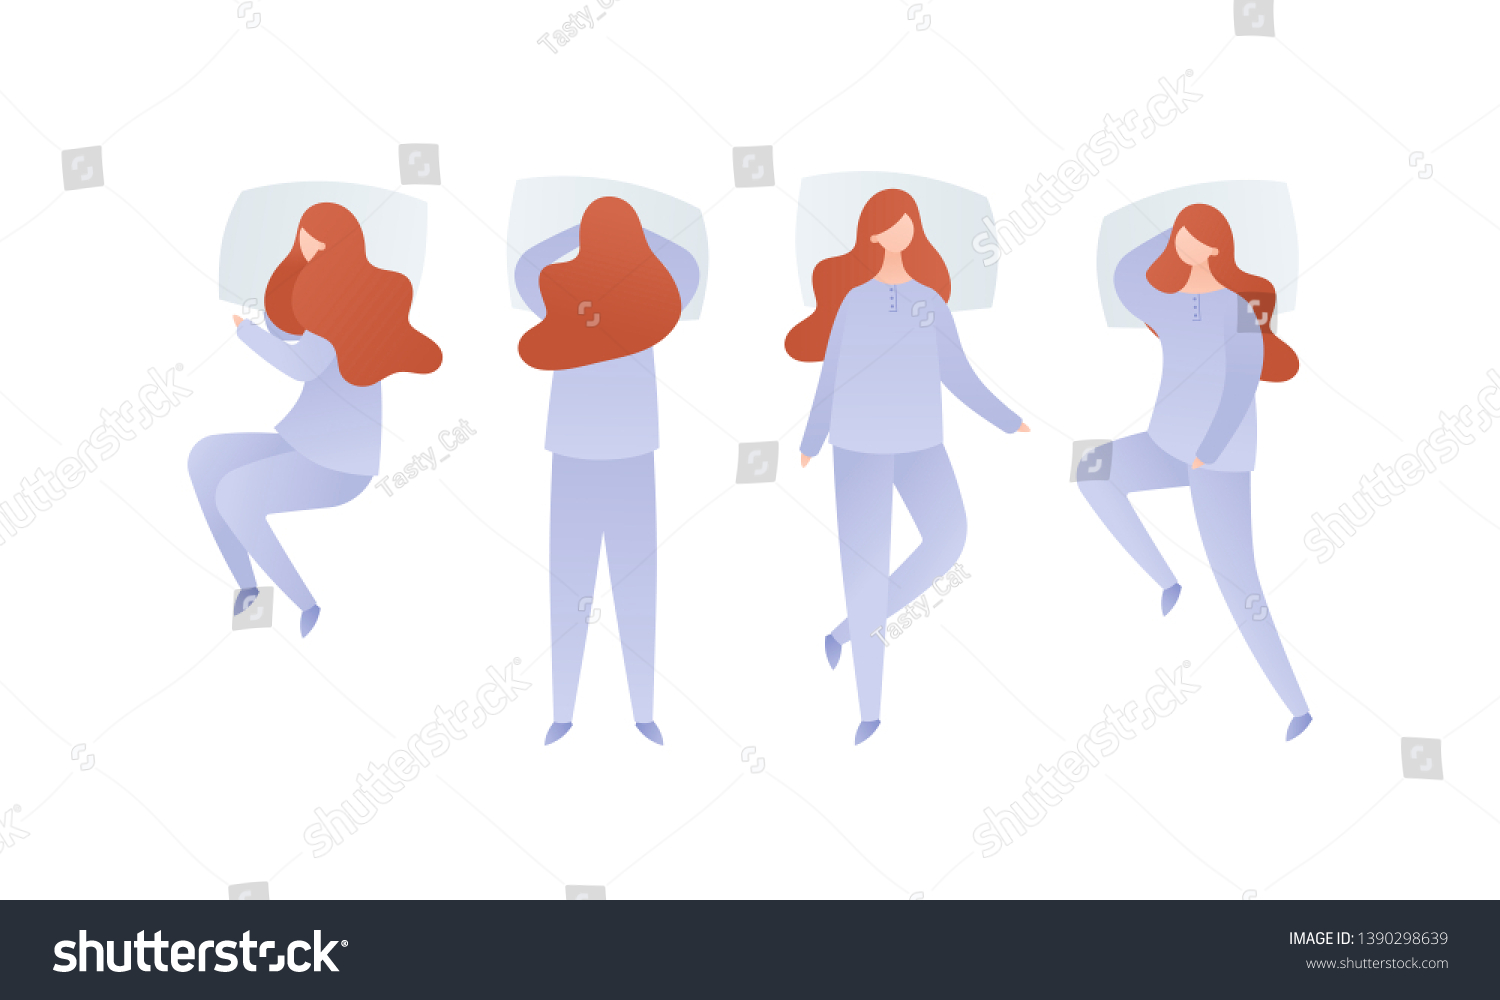 SVG of Vector flat modern character set of illustration. Group of redhead romantic beautiful women sleeping in different poses in pajamas isolated on white. Concept of sleeping in bed, insomnia, dream, relax svg